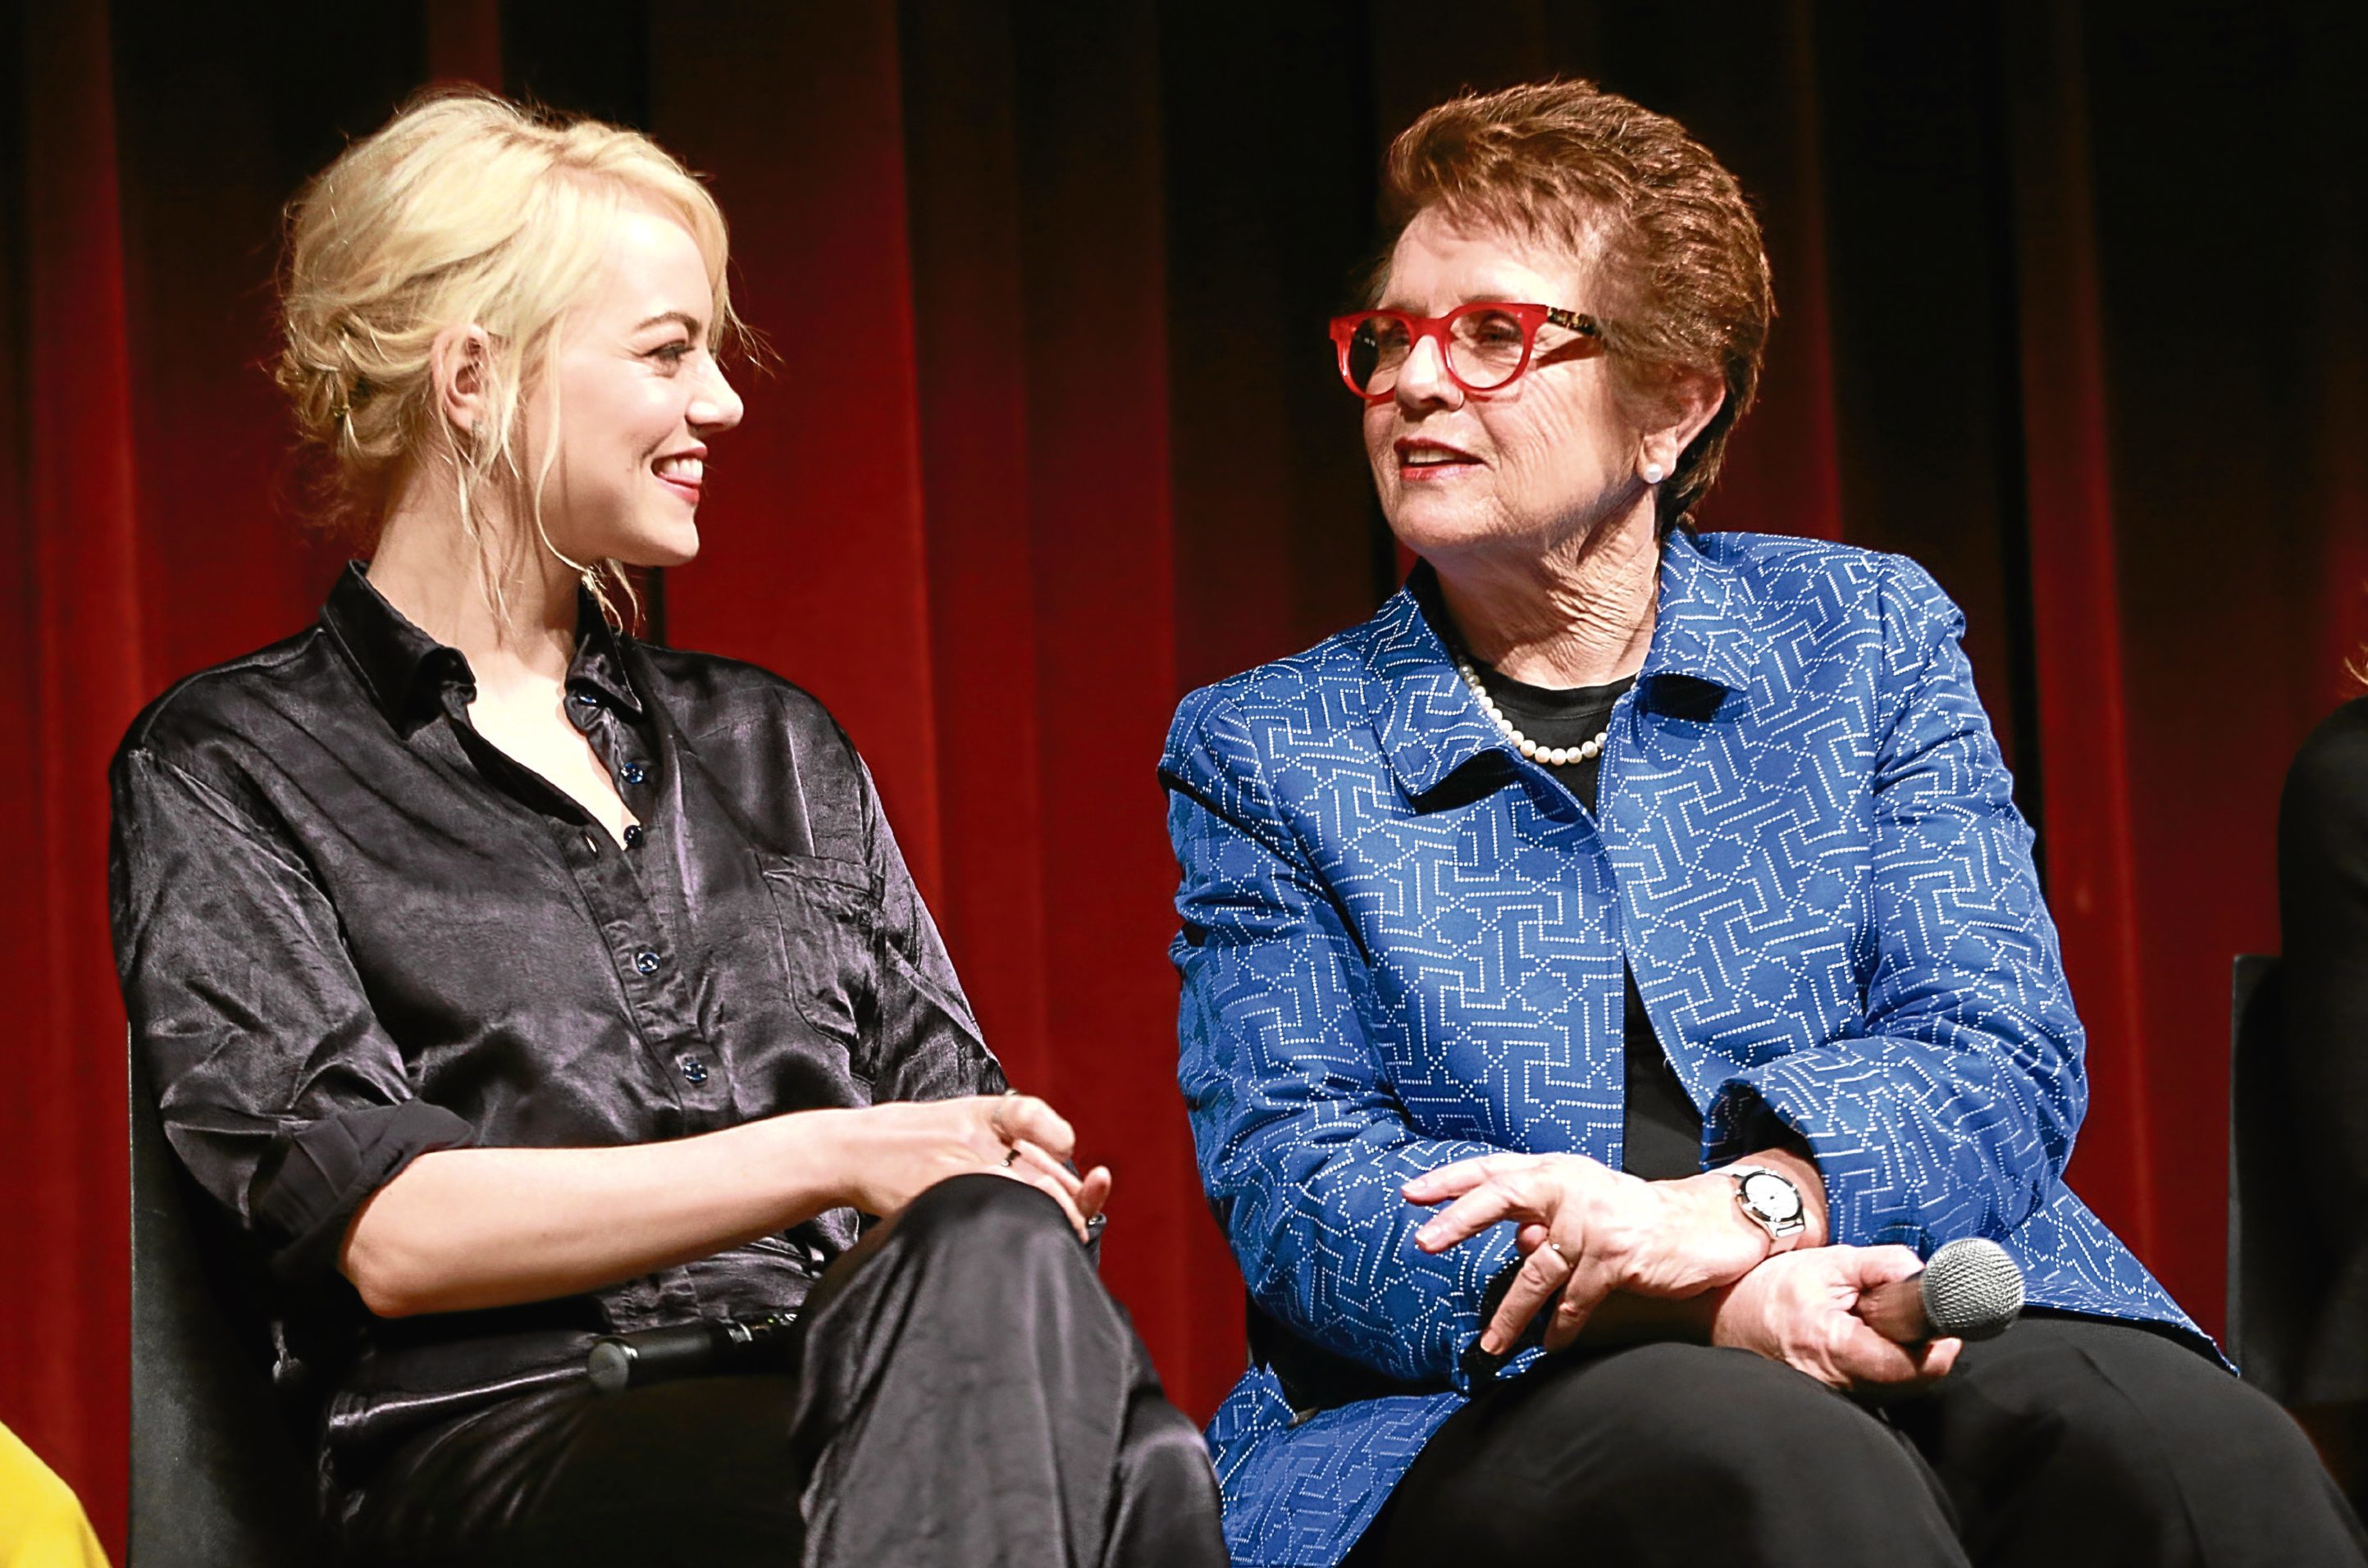 Emma Stone plays Billie Jean King in the Battle Of The Sexes film (Robin Marchant / Getty Images)